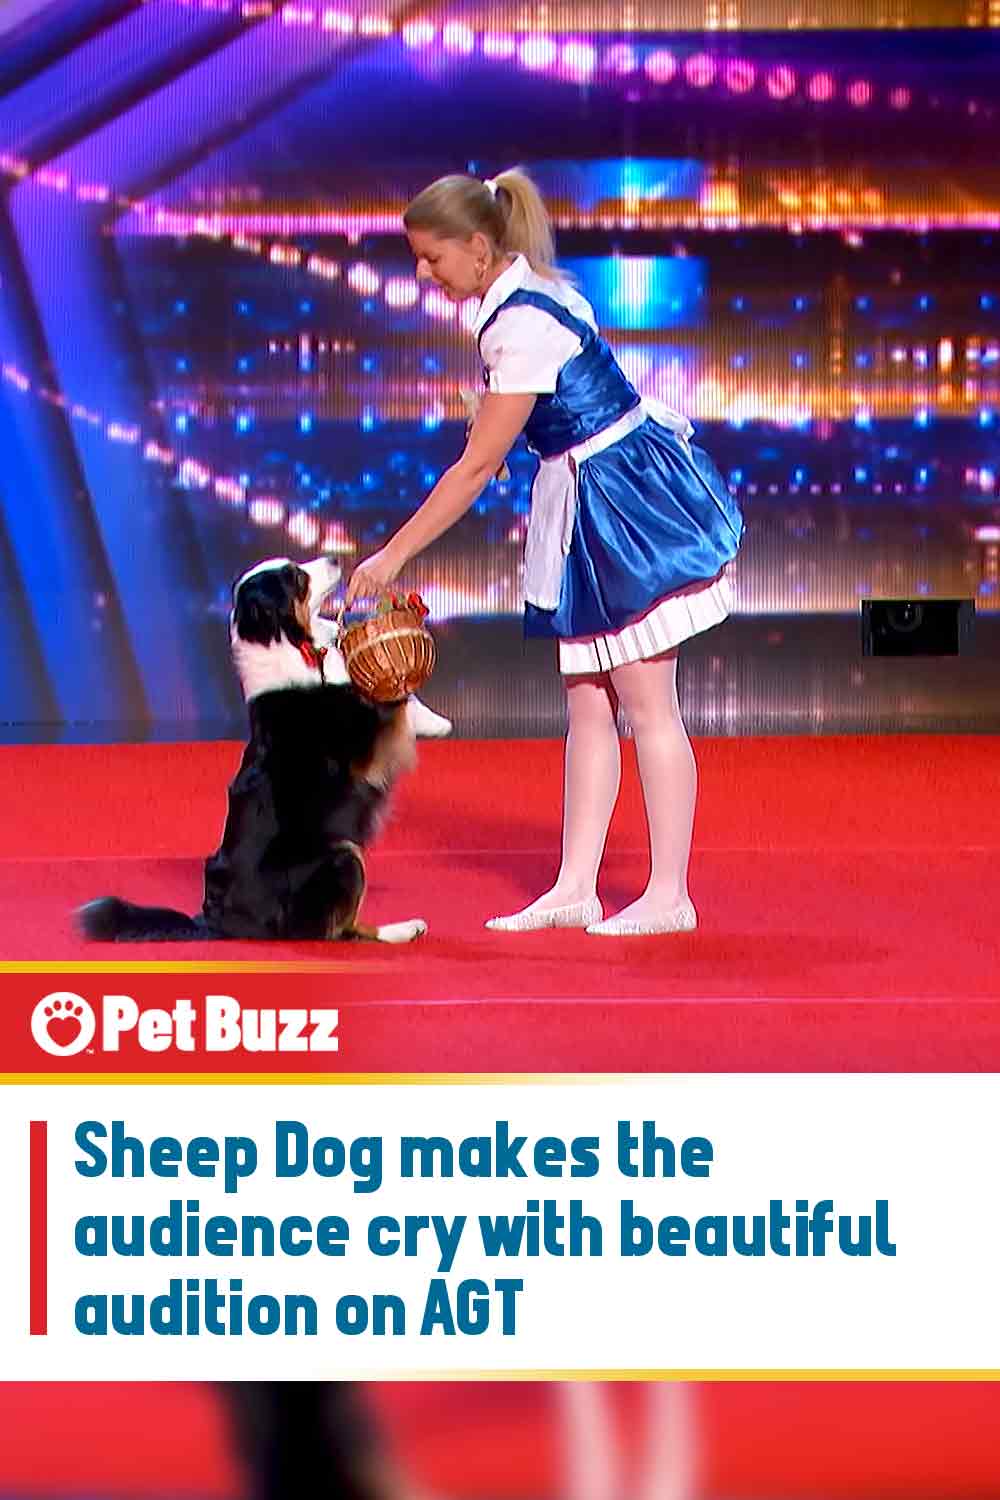 Sheep Dog makes the audience cry with beautiful audition on AGT